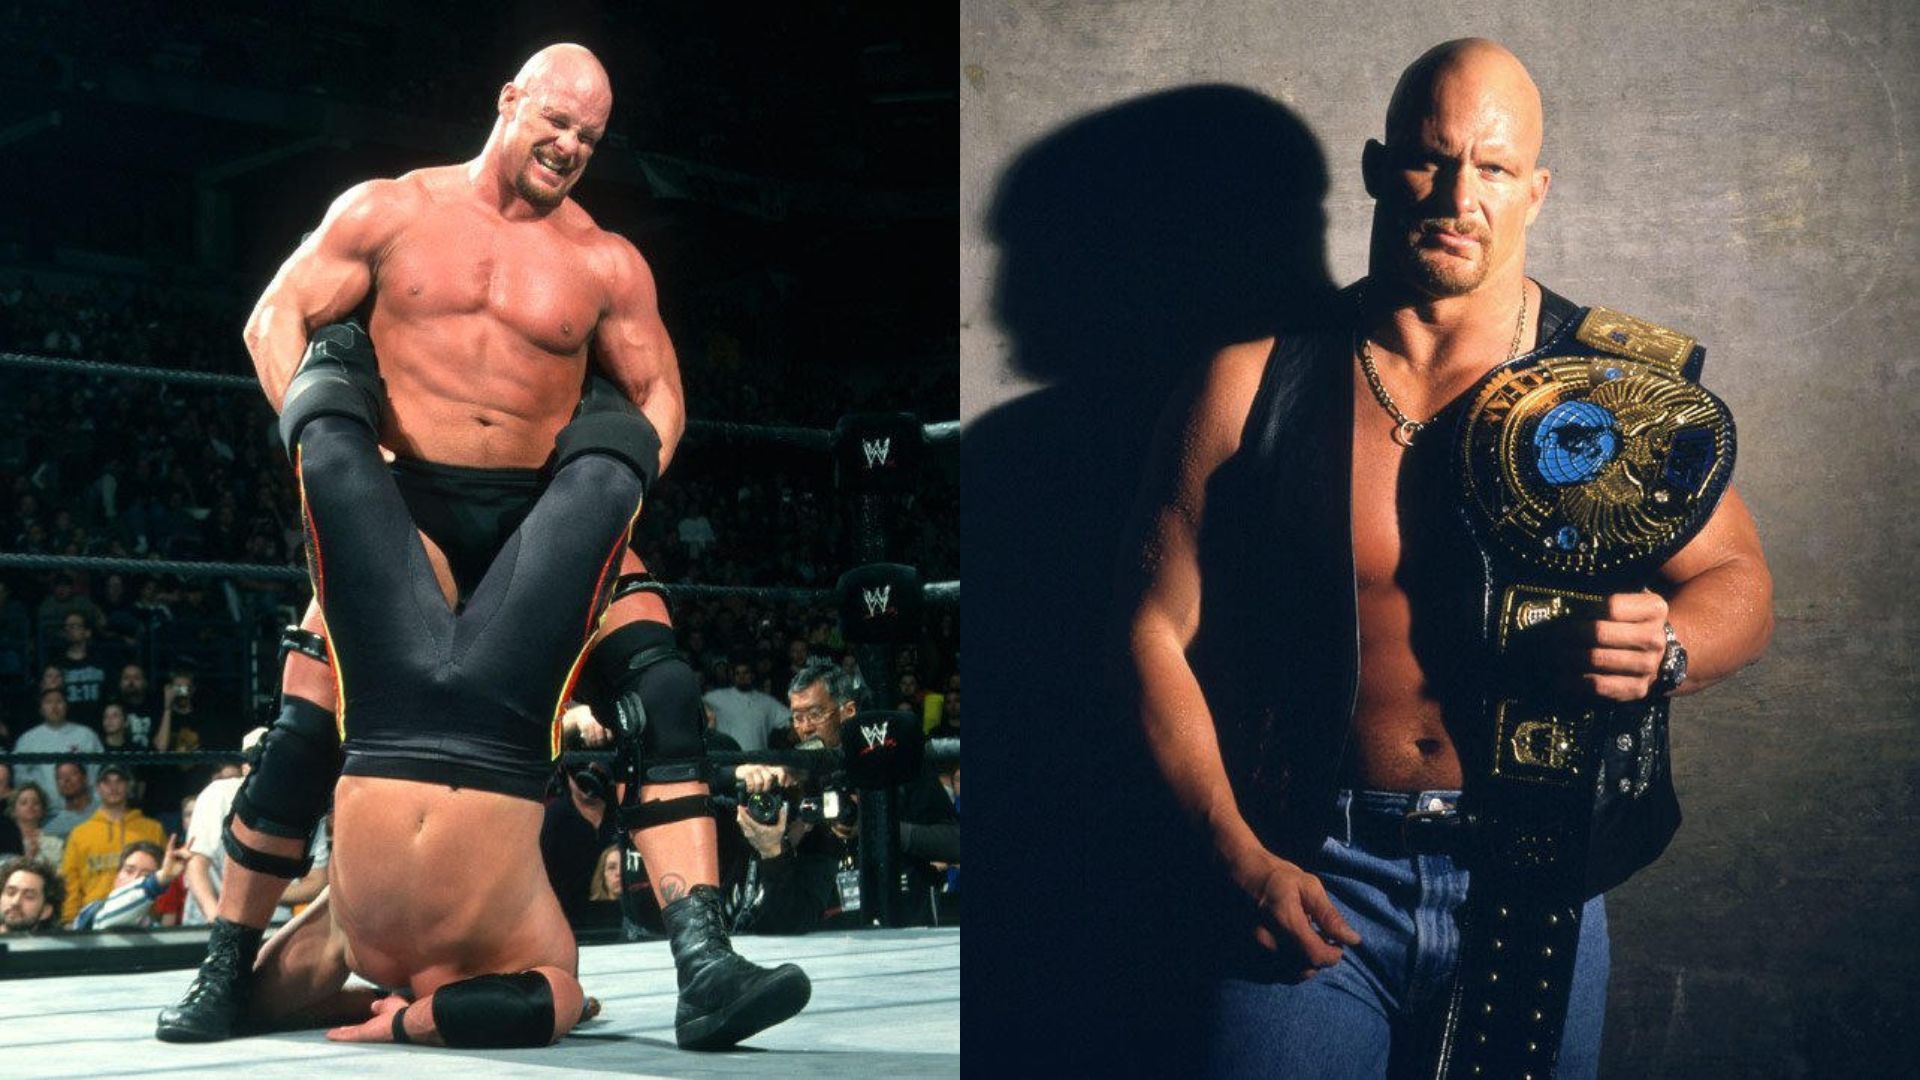 Stone Cold Steve Austin was one of the biggest superstars in WWE history